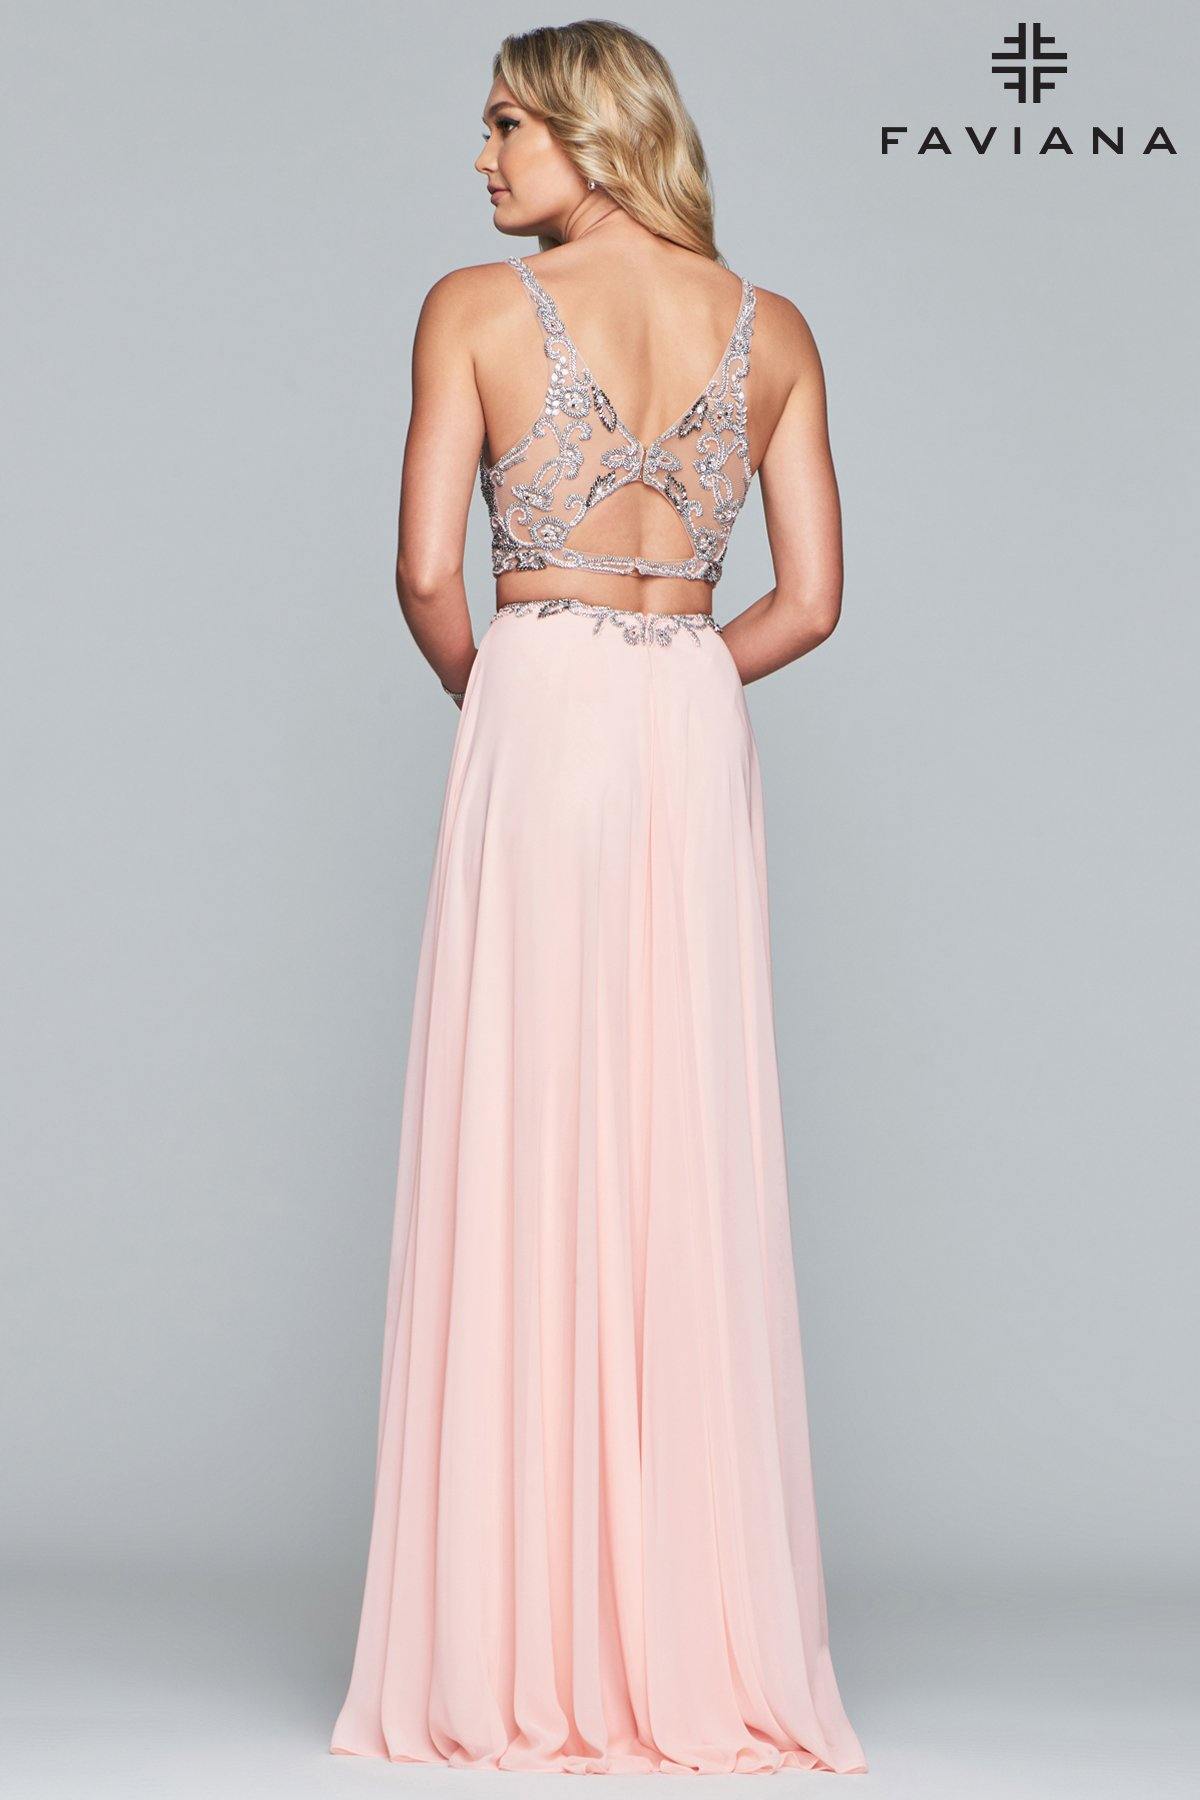 Faviana Sexy Two Piece Prom Dress S10244 Sale - The Dress Outlet